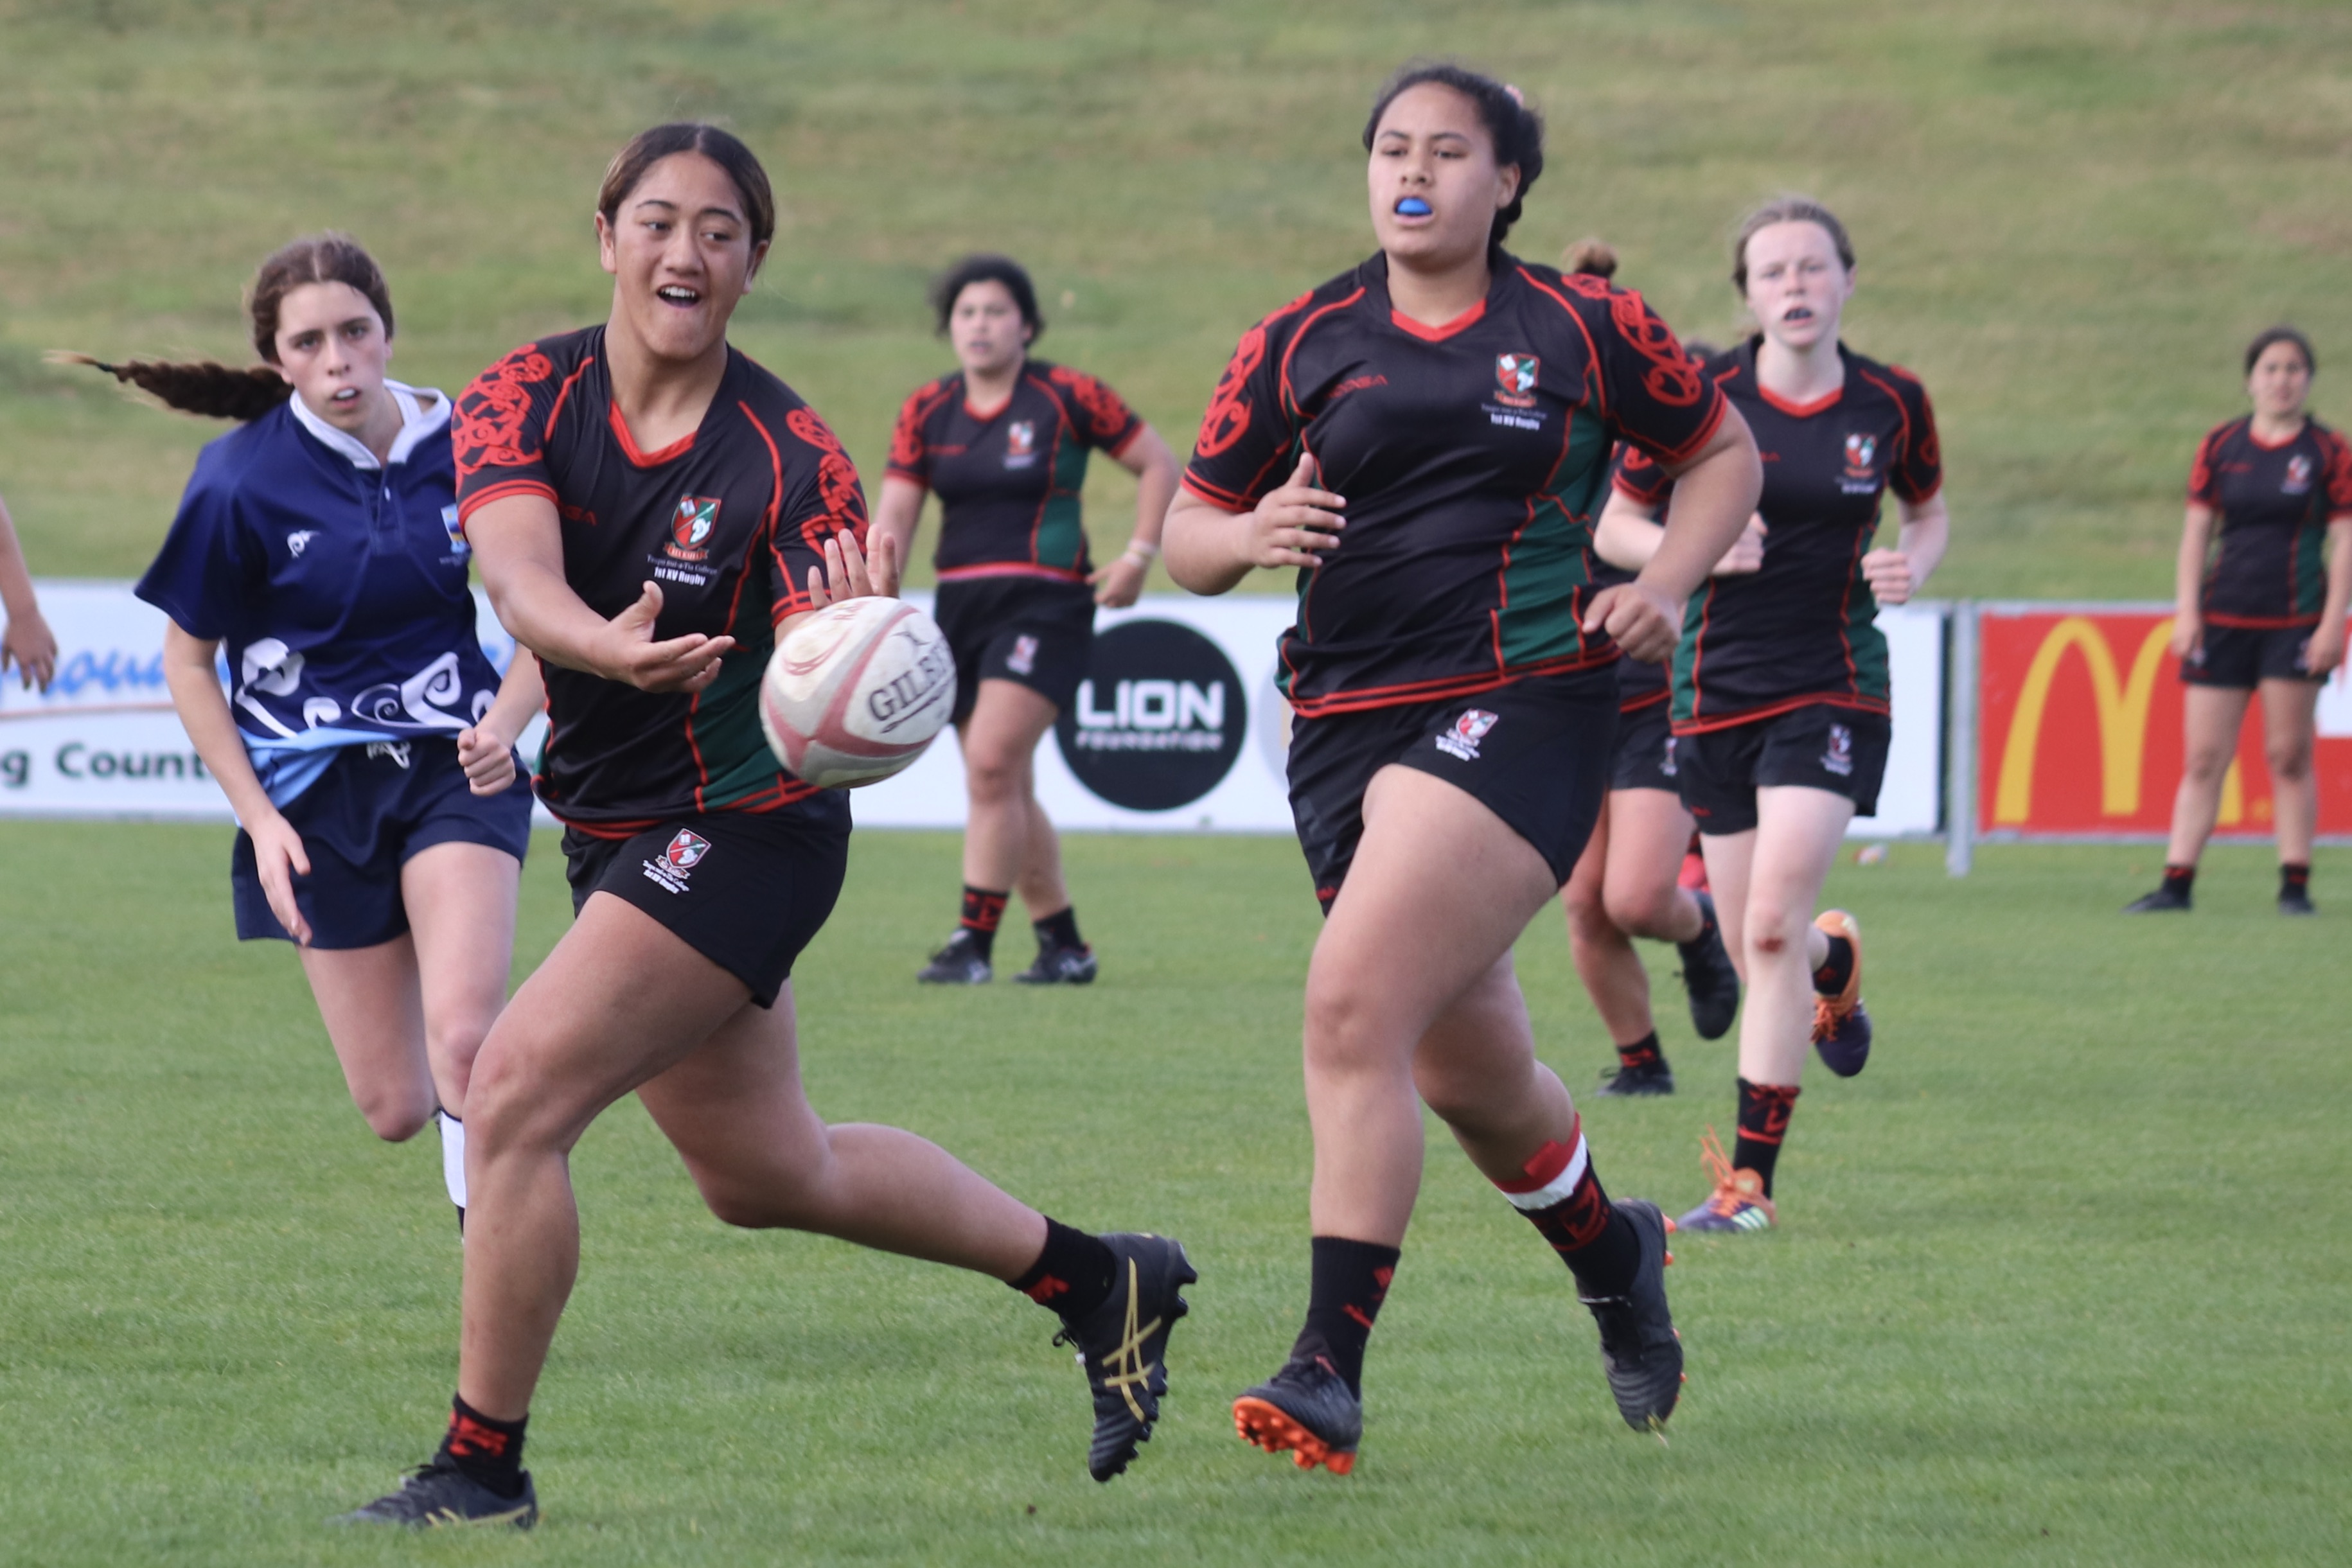 New program encourages more secondary school females to play rugby